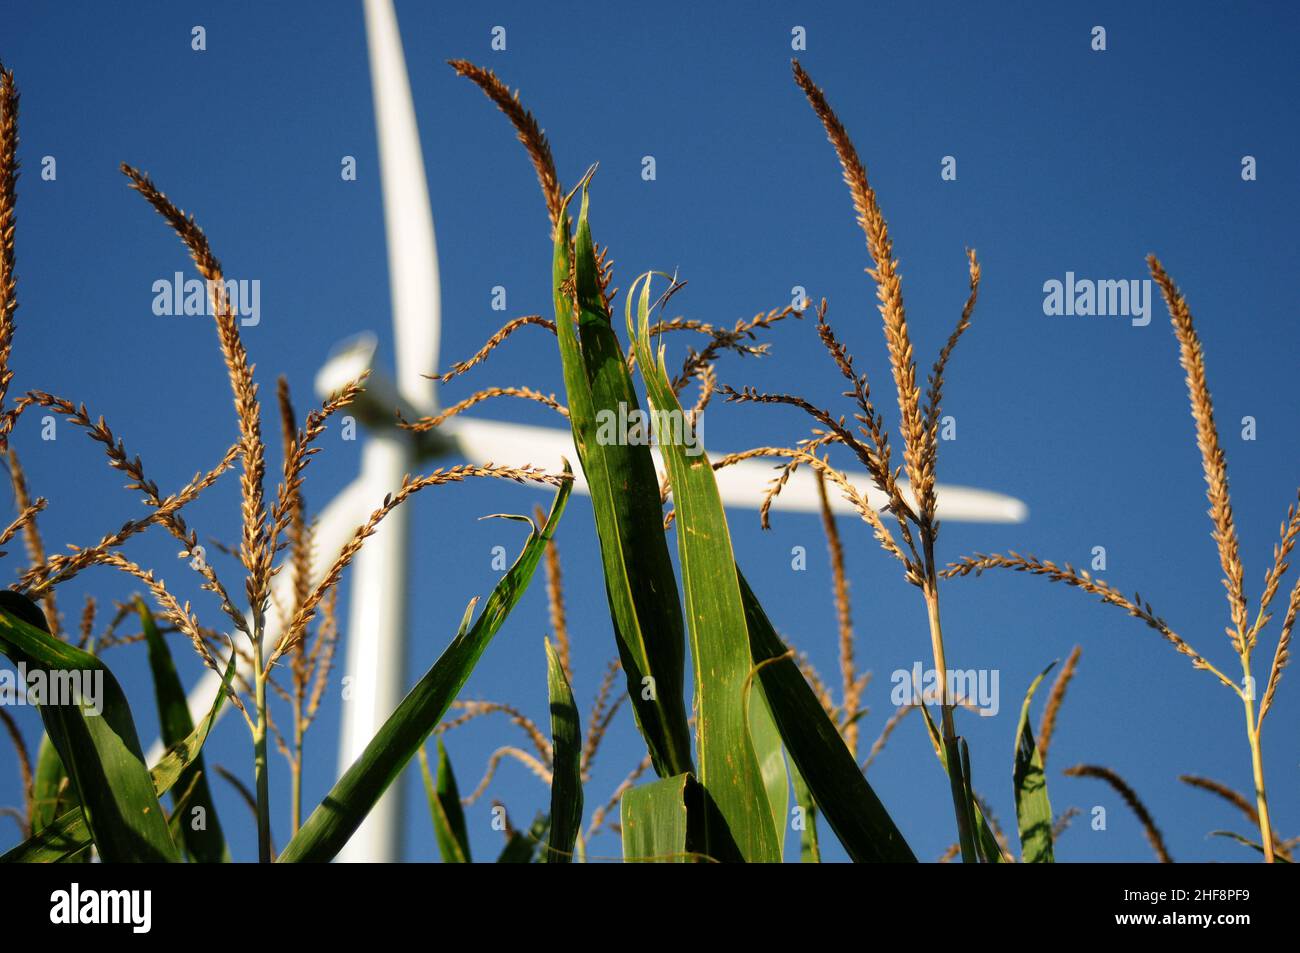 Sustainable energy in the Midwest. Wind turbine standing in a cornfield. Stock Photo